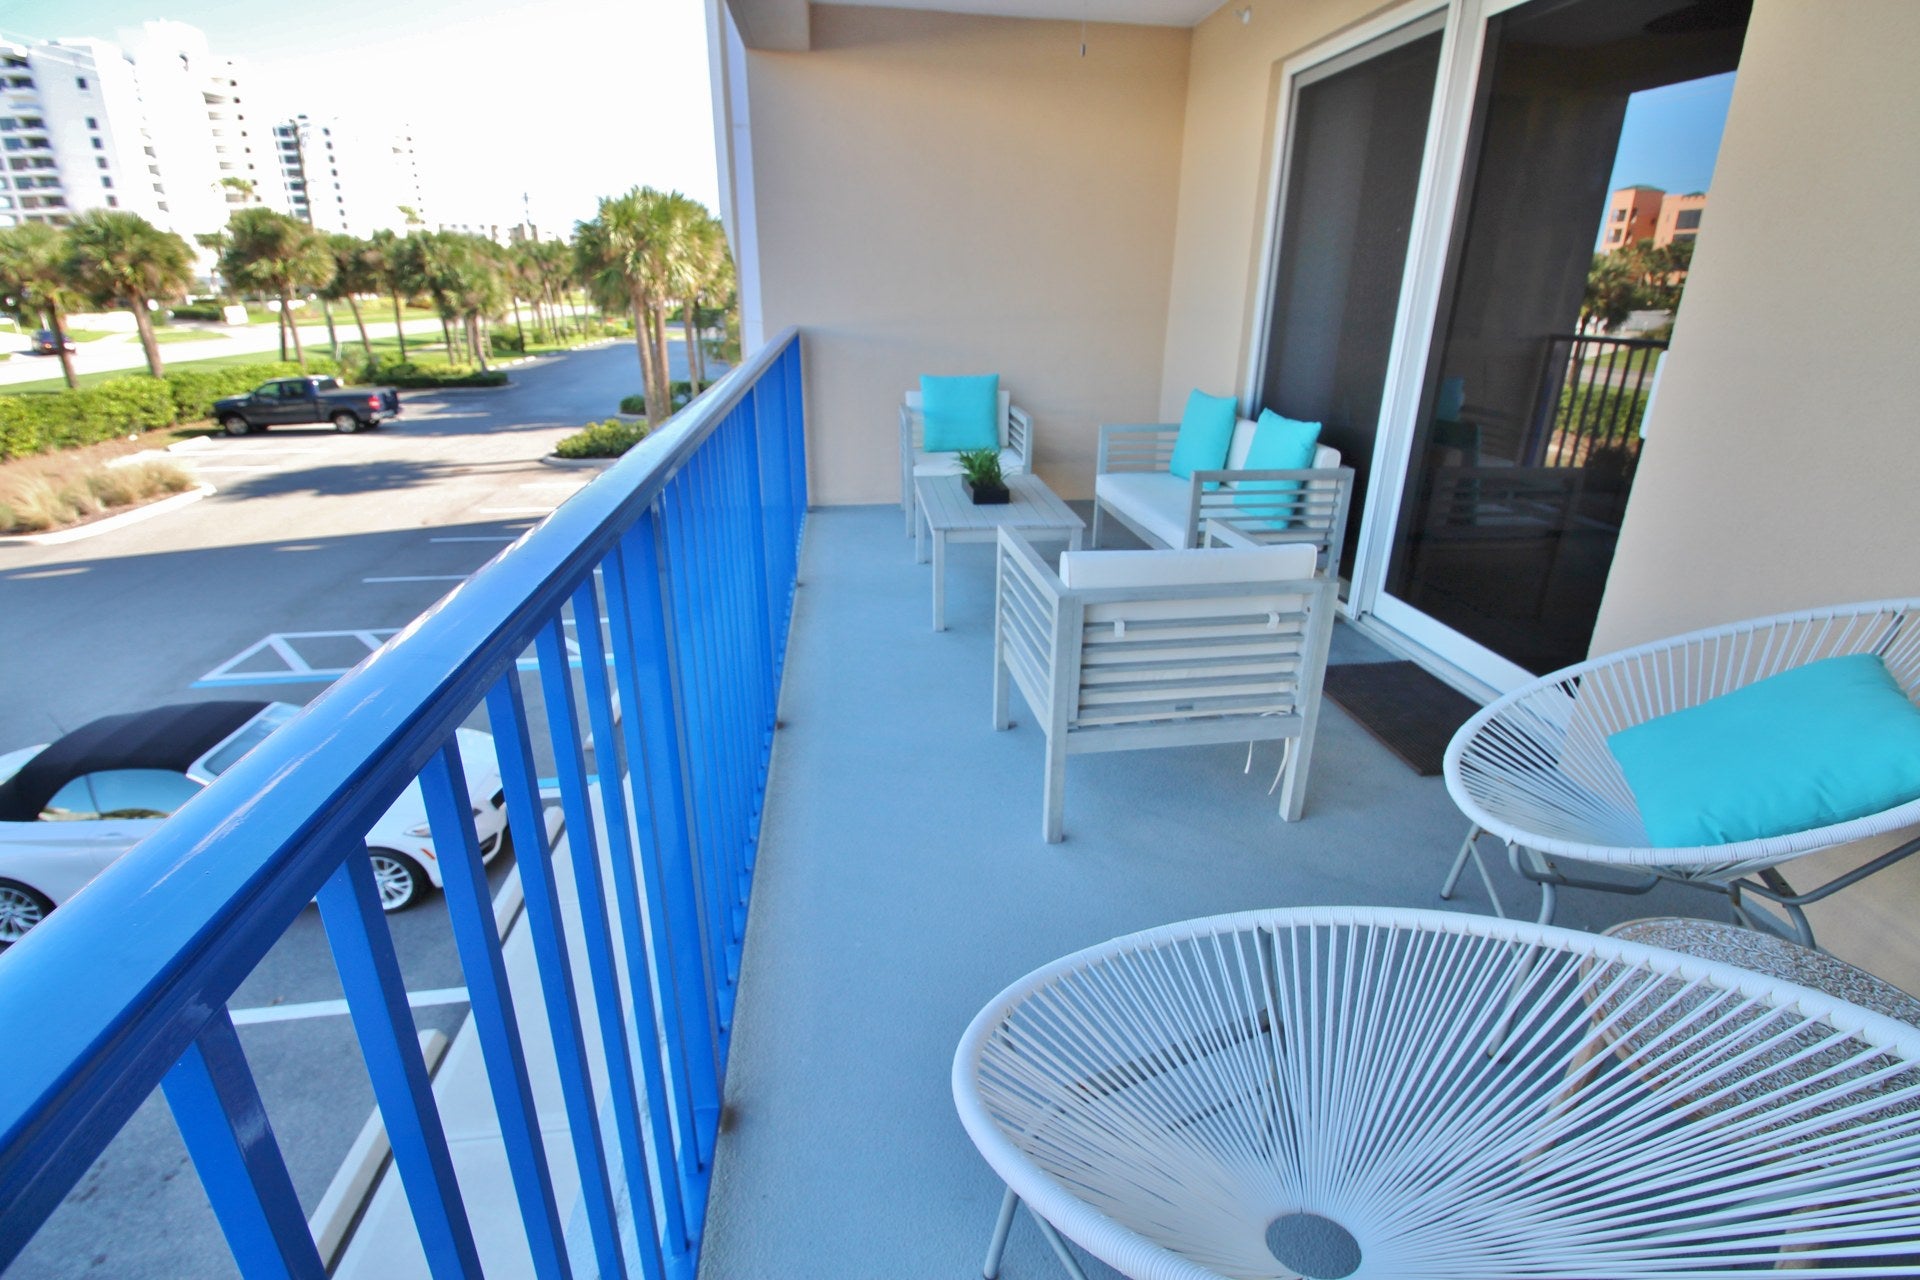 Balcony where you can unwind with your group